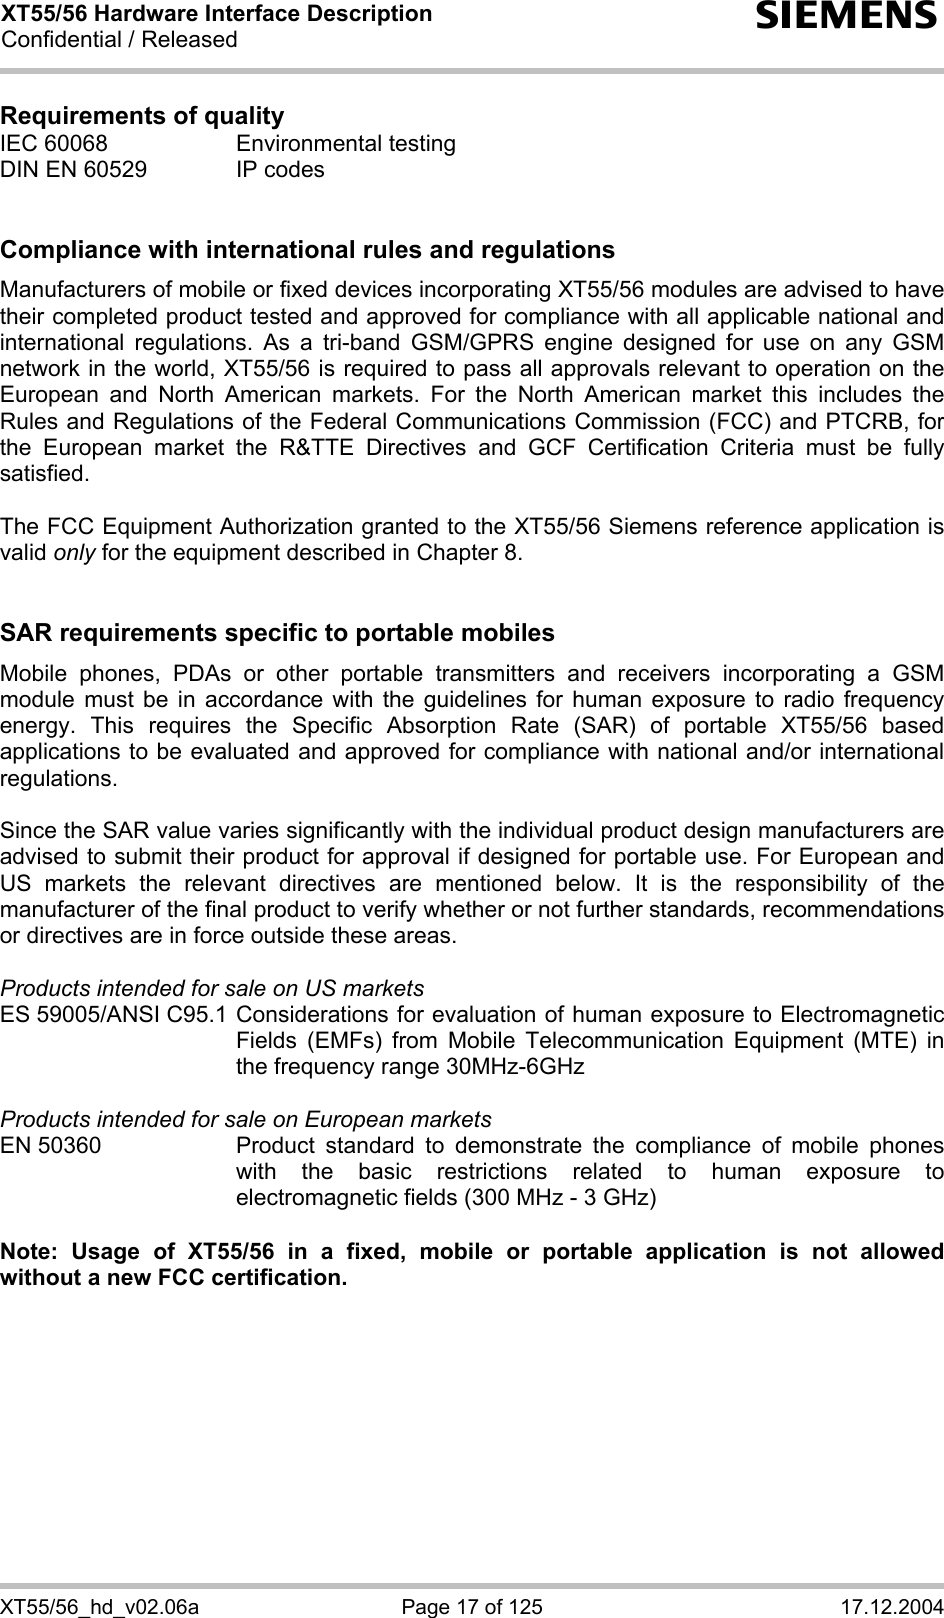 XT55/56 Hardware Interface Description Confidential / Released s XT55/56_hd_v02.06a  Page 17 of 125  17.12.2004 Requirements of quality IEC 60068  Environmental testing DIN EN 60529  IP codes   Compliance with international rules and regulations Manufacturers of mobile or fixed devices incorporating XT55/56 modules are advised to have their completed product tested and approved for compliance with all applicable national and international regulations. As a tri-band GSM/GPRS engine designed for use on any GSM network in the world, XT55/56 is required to pass all approvals relevant to operation on the European and North American markets. For the North American market this includes the Rules and Regulations of the Federal Communications Commission (FCC) and PTCRB, for the European market the R&amp;TTE Directives and GCF Certification Criteria must be fully satisfied.  The FCC Equipment Authorization granted to the XT55/56 Siemens reference application is valid only for the equipment described in Chapter 8.   SAR requirements specific to portable mobiles Mobile phones, PDAs or other portable transmitters and receivers incorporating a GSM module must be in accordance with the guidelines for human exposure to radio frequency energy. This requires the Specific Absorption Rate (SAR) of portable XT55/56 based applications to be evaluated and approved for compliance with national and/or international regulations.   Since the SAR value varies significantly with the individual product design manufacturers are advised to submit their product for approval if designed for portable use. For European and US markets the relevant directives are mentioned below. It is the responsibility of the manufacturer of the final product to verify whether or not further standards, recommendations or directives are in force outside these areas.   Products intended for sale on US markets ES 59005/ANSI C95.1 Considerations for evaluation of human exposure to Electromagnetic Fields (EMFs) from Mobile Telecommunication Equipment (MTE) in the frequency range 30MHz-6GHz   Products intended for sale on European markets EN 50360  Product standard to demonstrate the compliance of mobile phones with the basic restrictions related to human exposure to electromagnetic fields (300 MHz - 3 GHz)  Note: Usage of XT55/56 in a fixed, mobile or portable application is not allowed without a new FCC certification.  